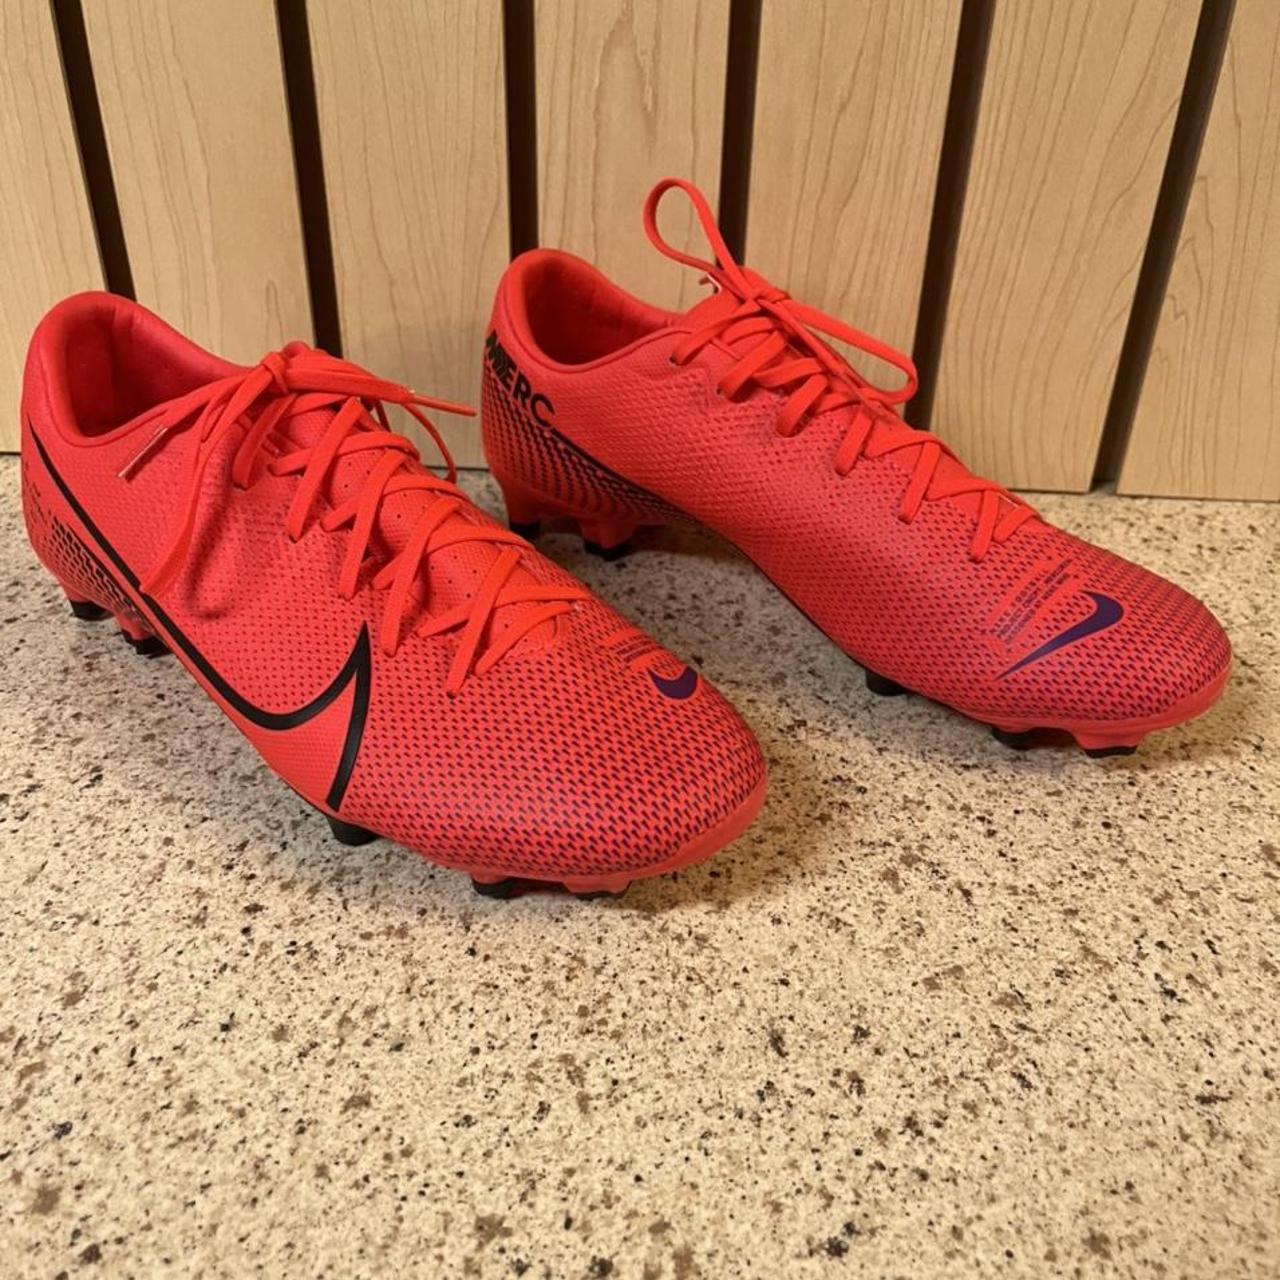 Product Image 1 - Nike Men's Football Boots, Red